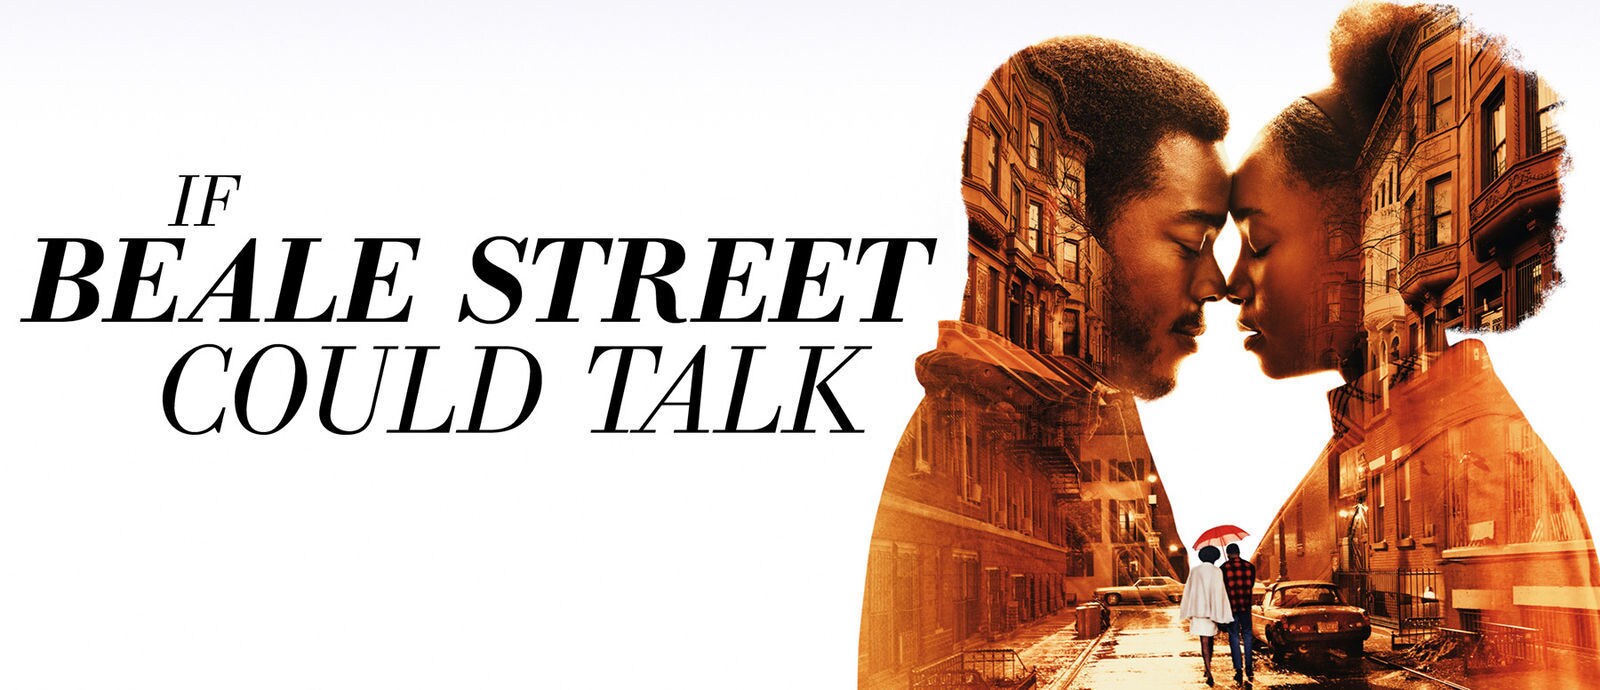 If Beale Street Could Talk Hero